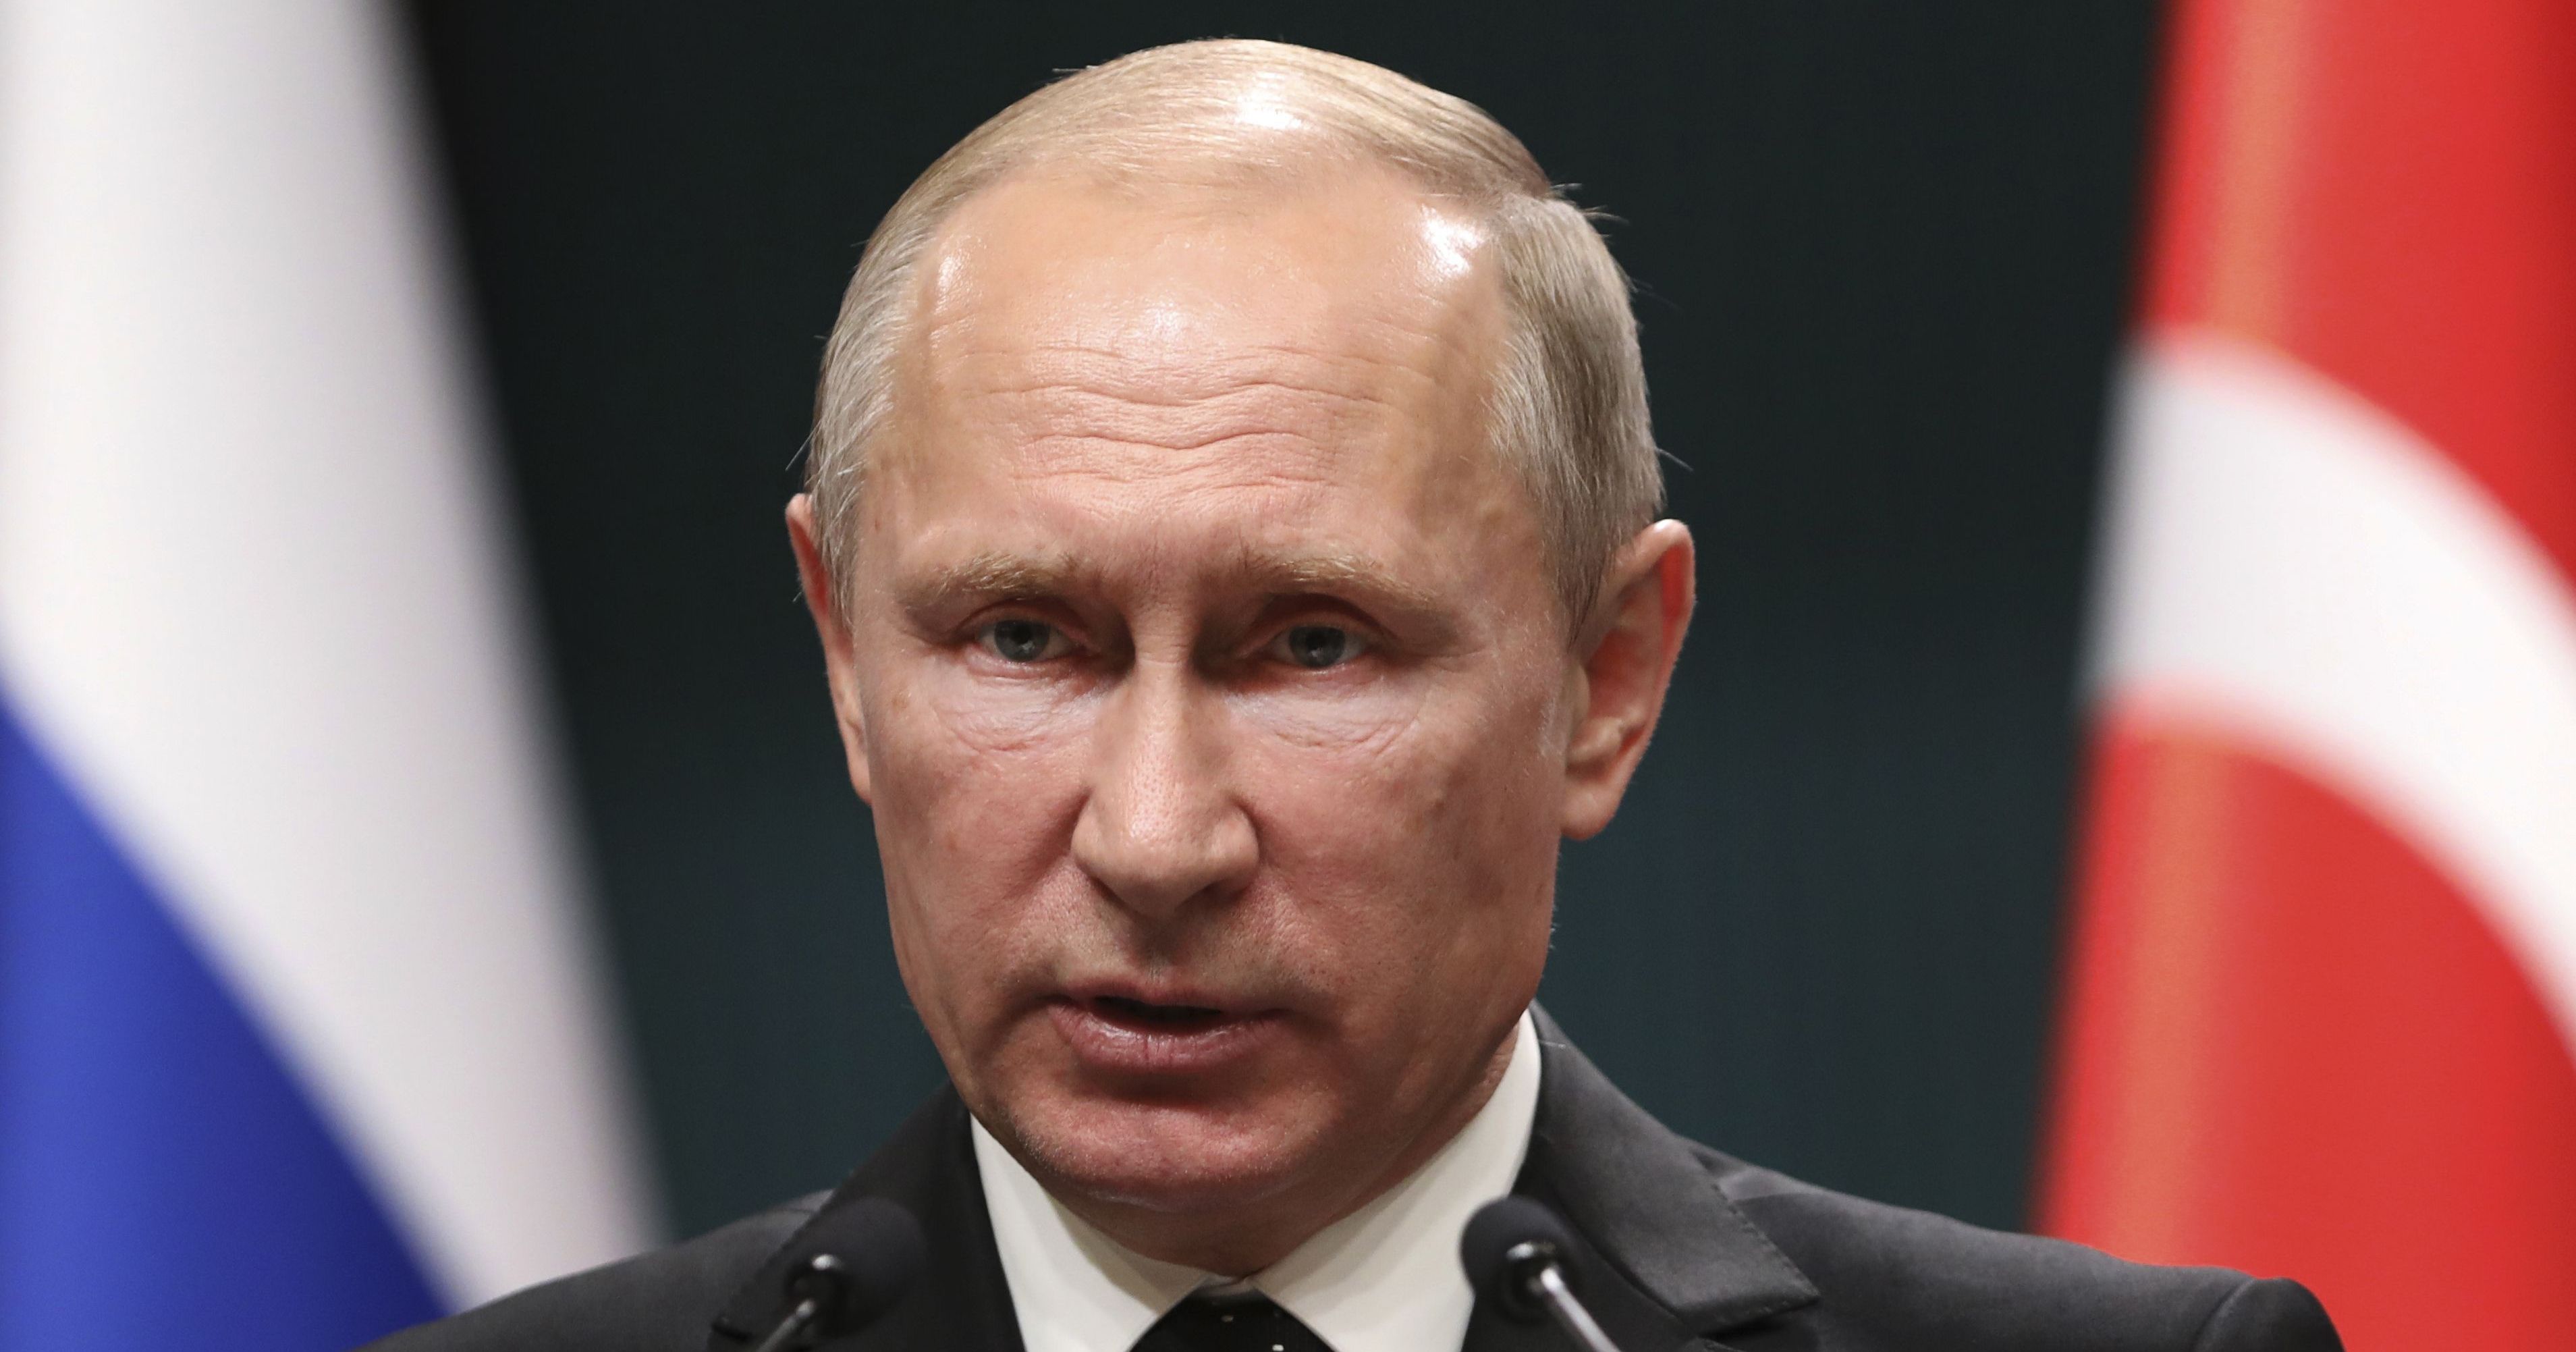 Vladimir Putin Claims Victory In Syria Like A Boss, Orders Troops To 